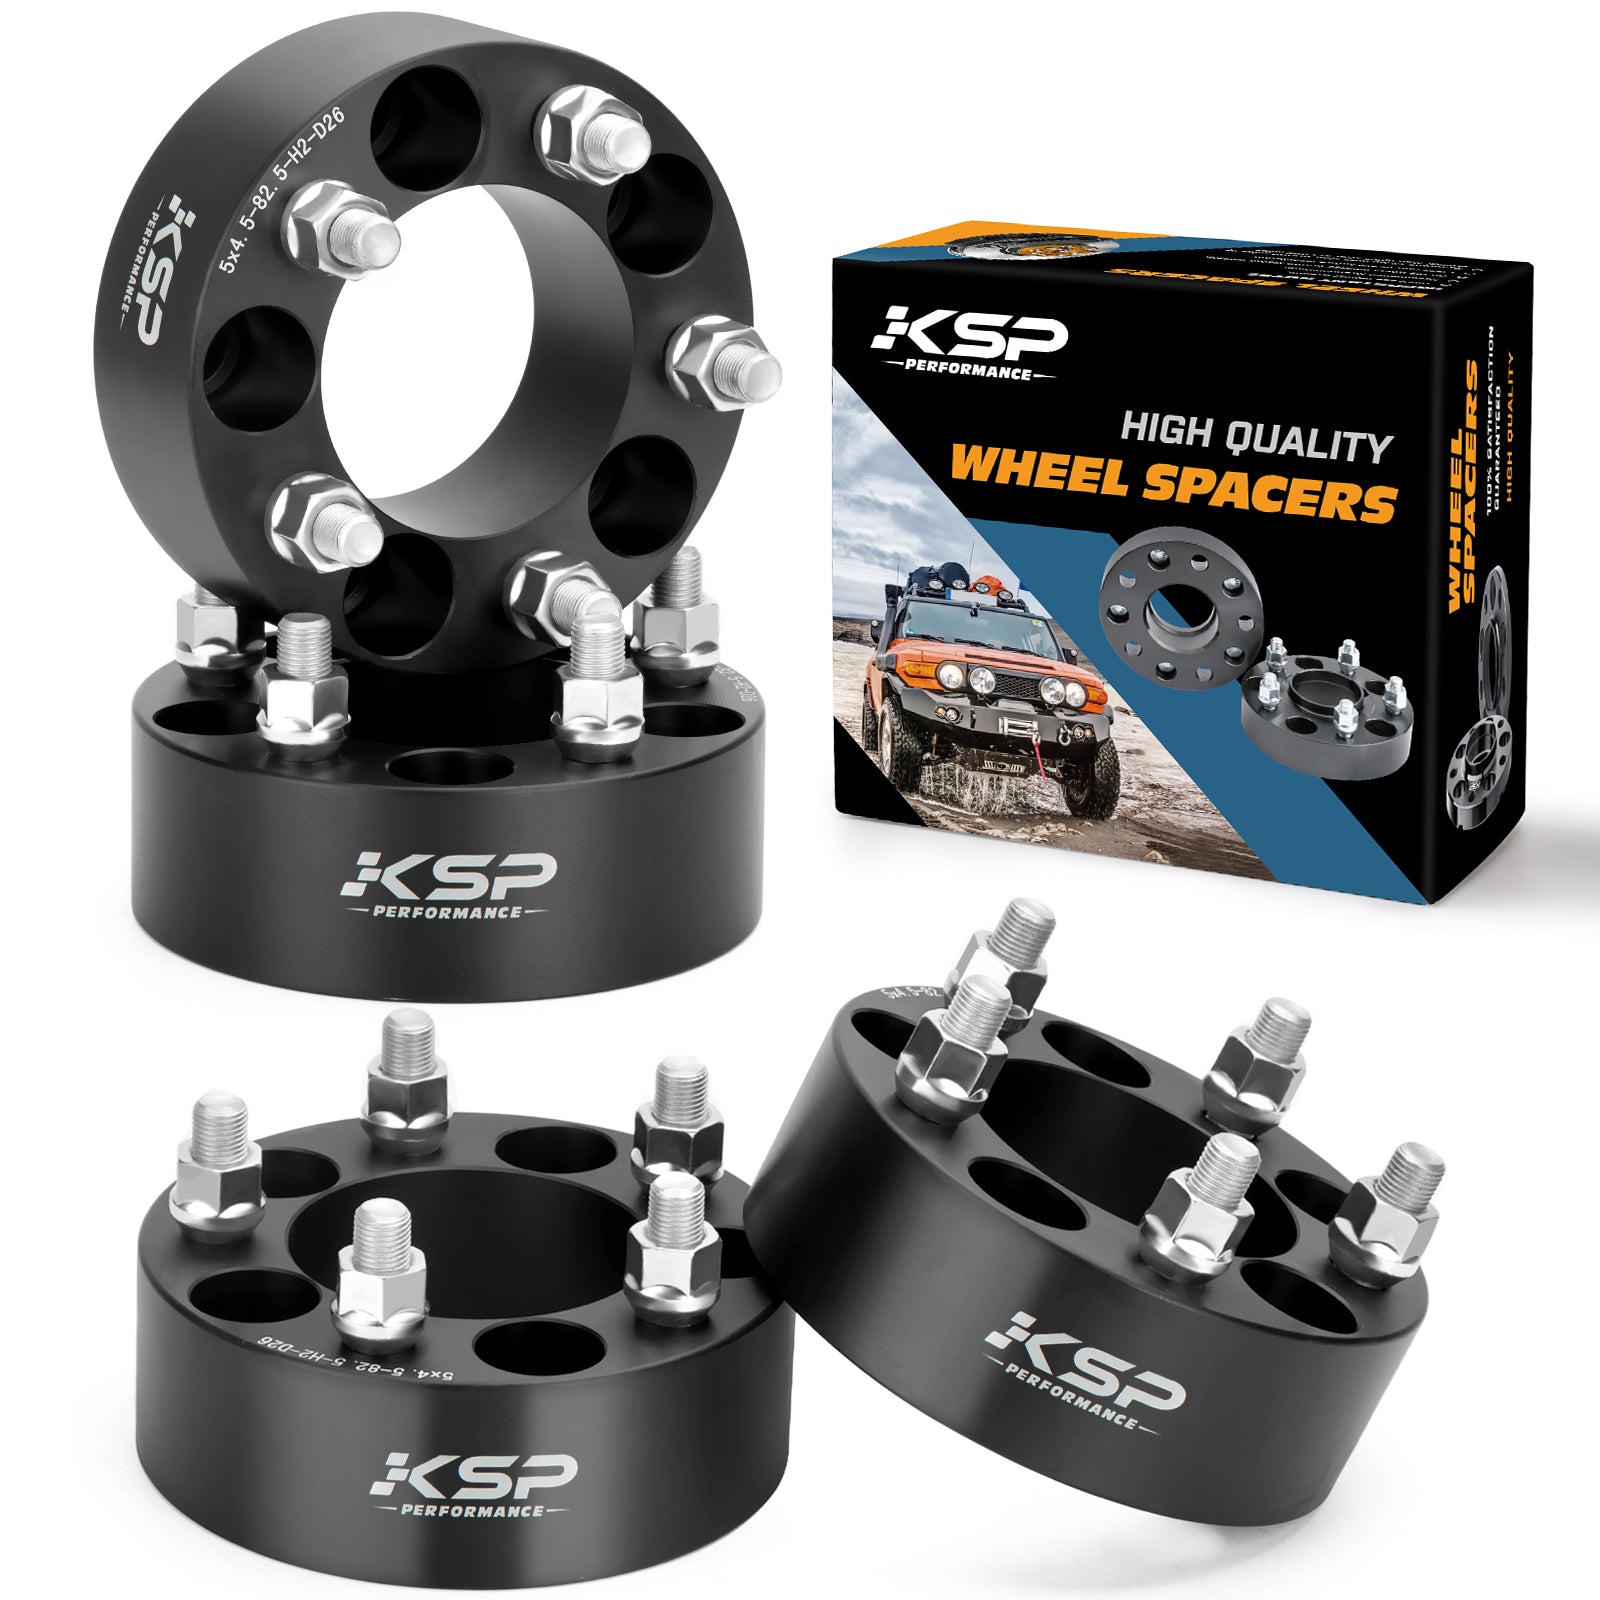 5x4.5 Forged Wheel Spacer for Ford Explorer Mustang Falcon Ranger xccscss.